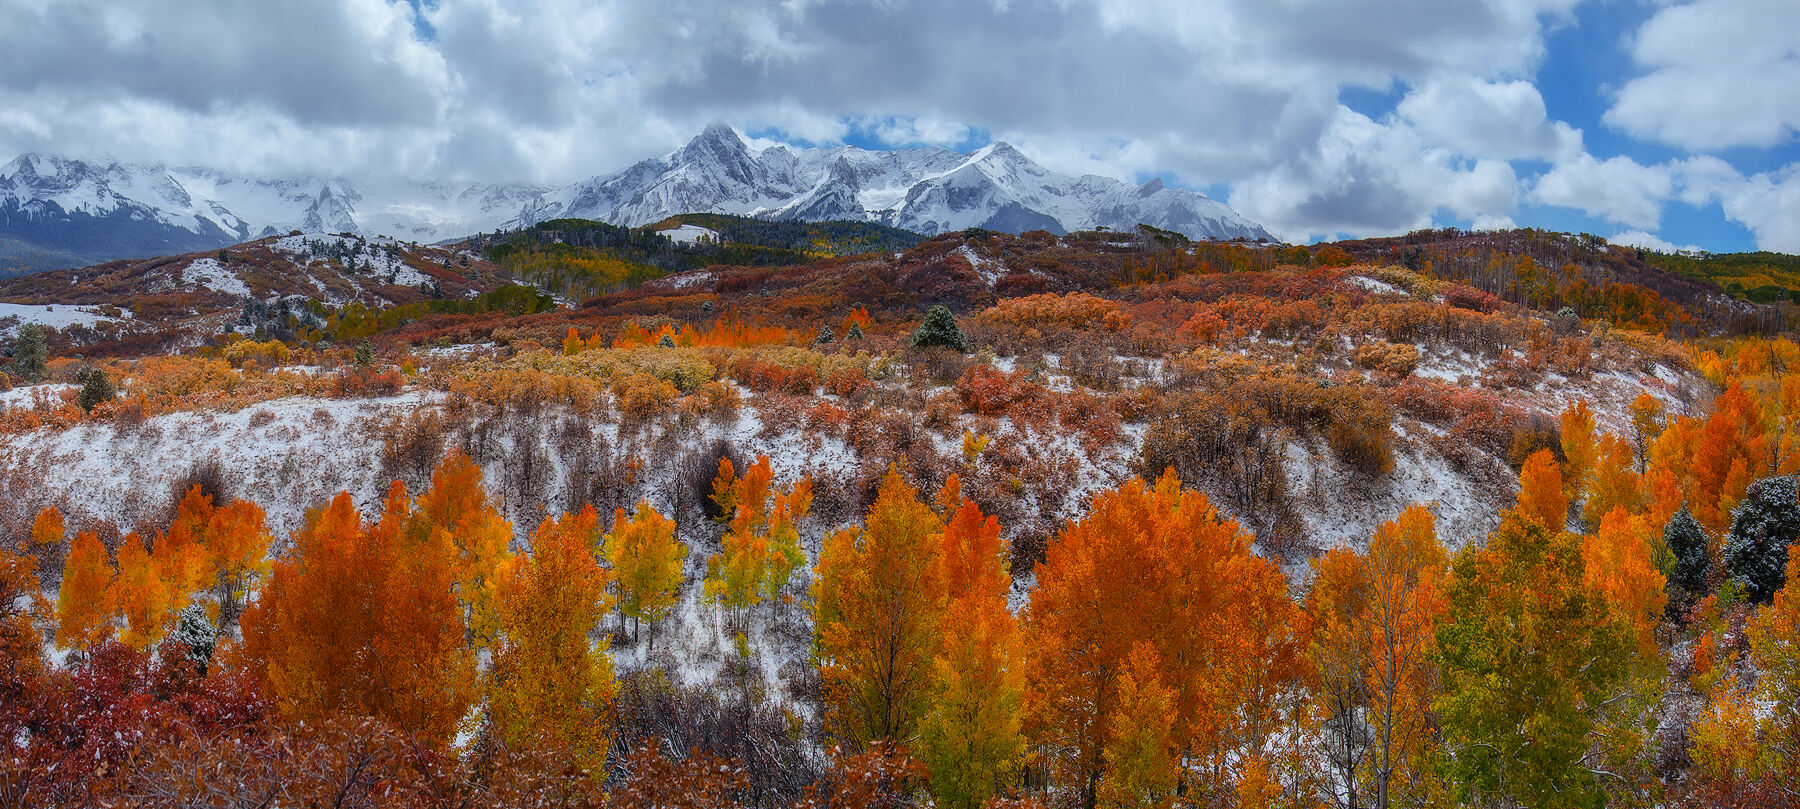 Snow on the distant mountains and in the ground on the valley below provide a contrasting background for the fall colors on the aspen trees.